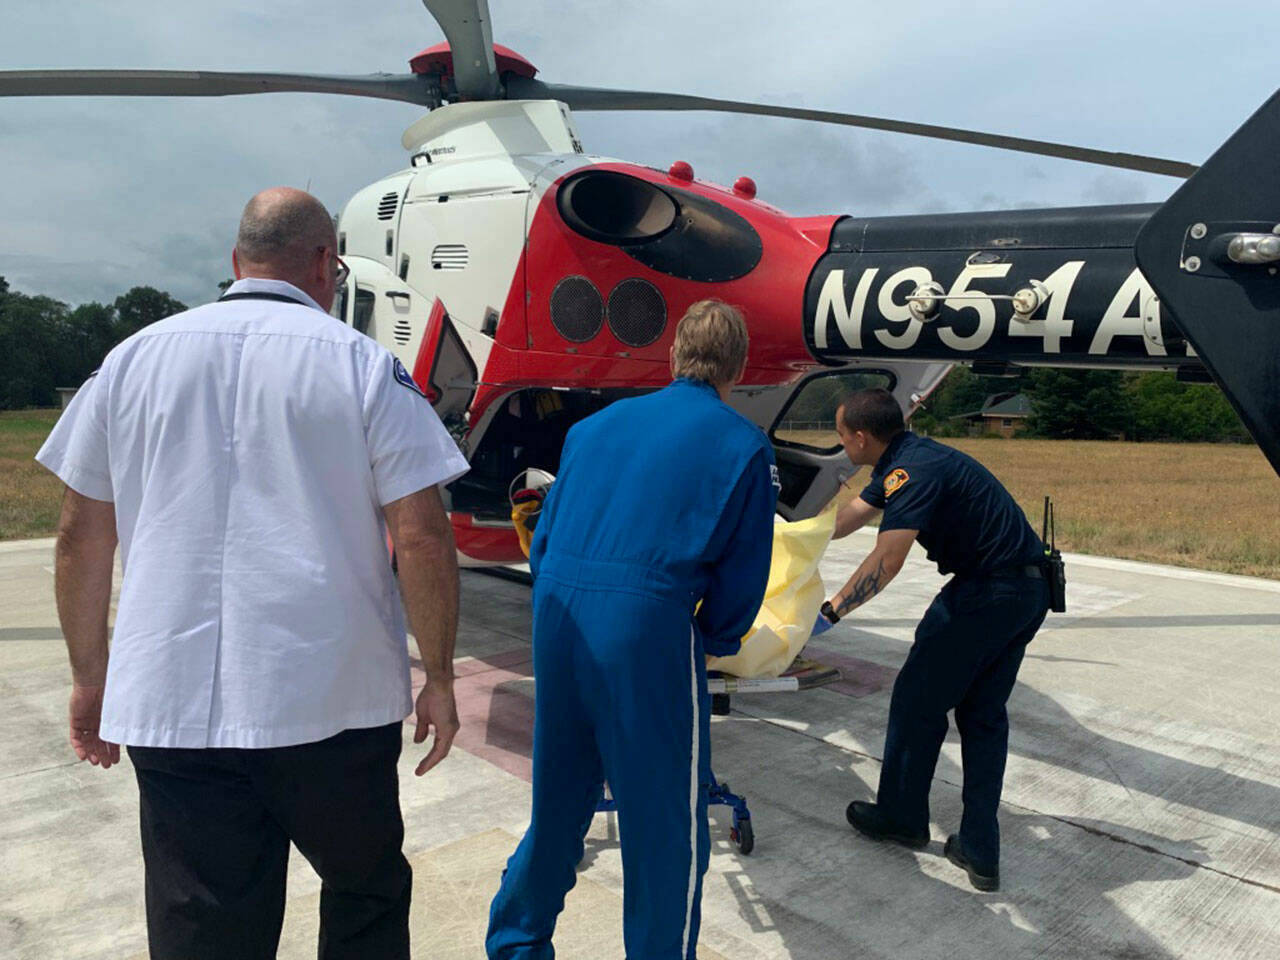 (Brigitte Schran Brown Photo) As part of the No Surprises Act in the Consolidated Appropriations Act, 2021, additional out-of-network bills are prohibited for certain medical services, including air ambulances.